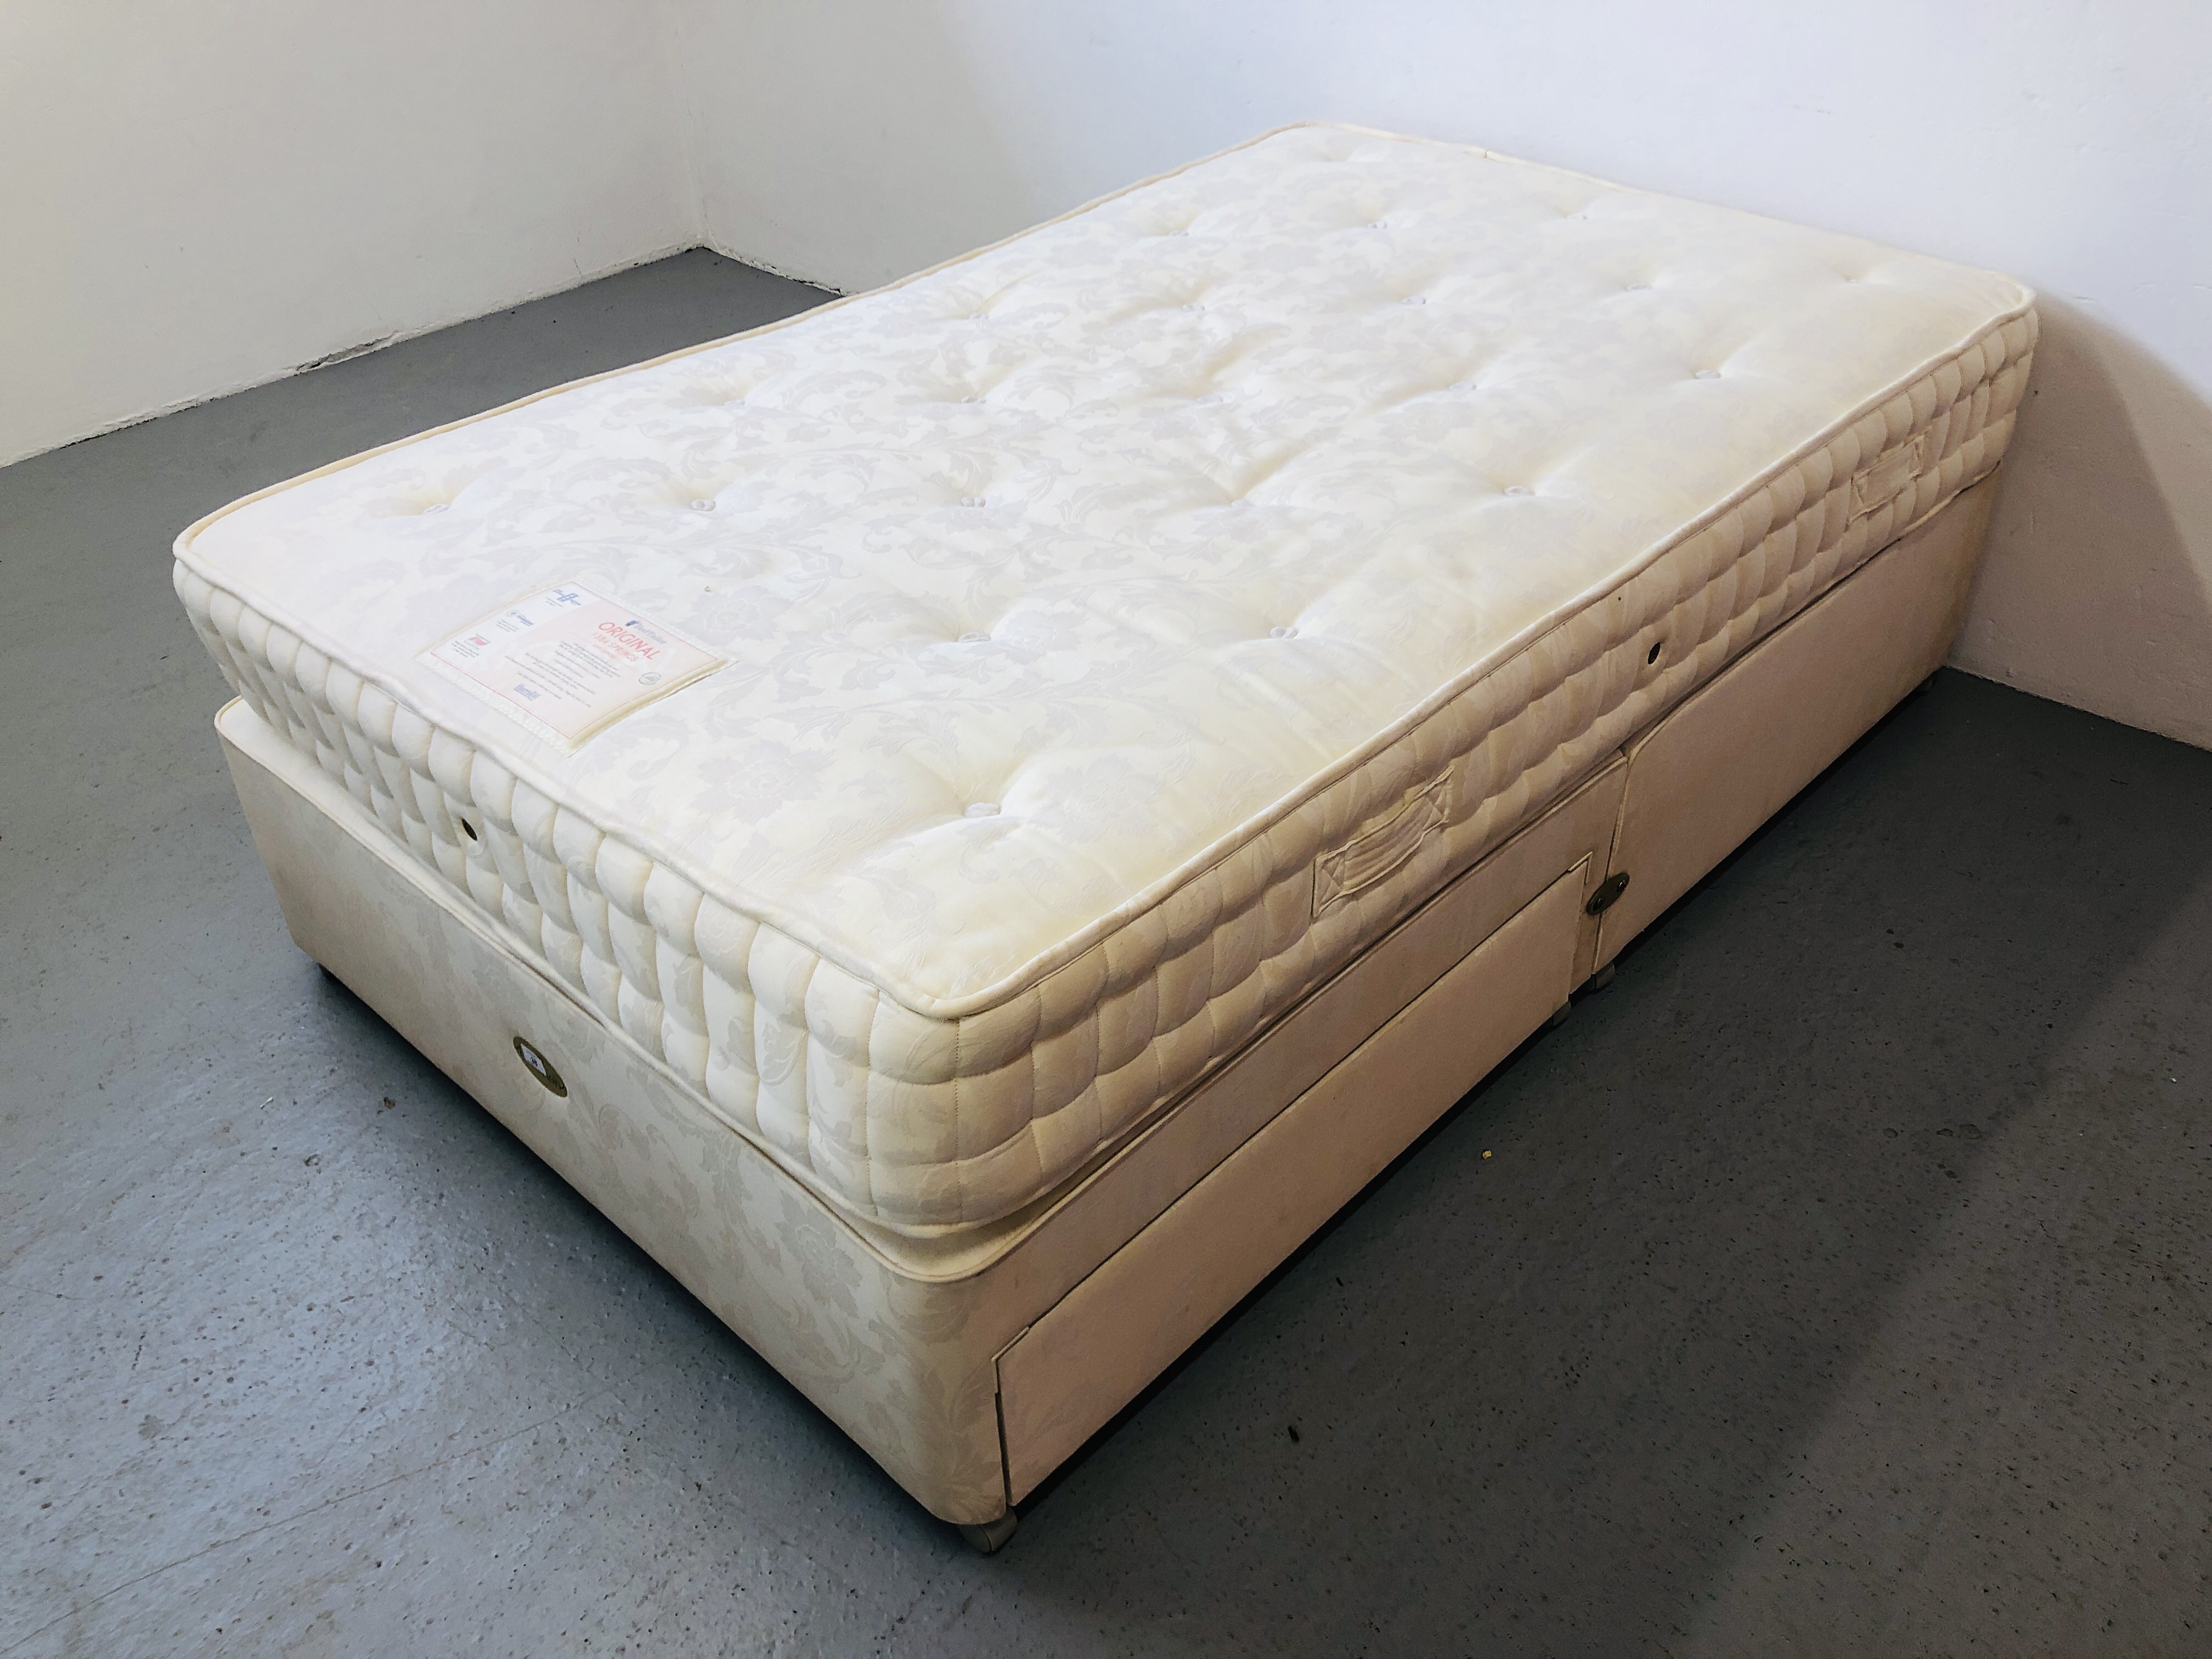 HARRISON ¾ DIVAN BED WITH DRAWER BASE AND MATTRESS - Image 3 of 3